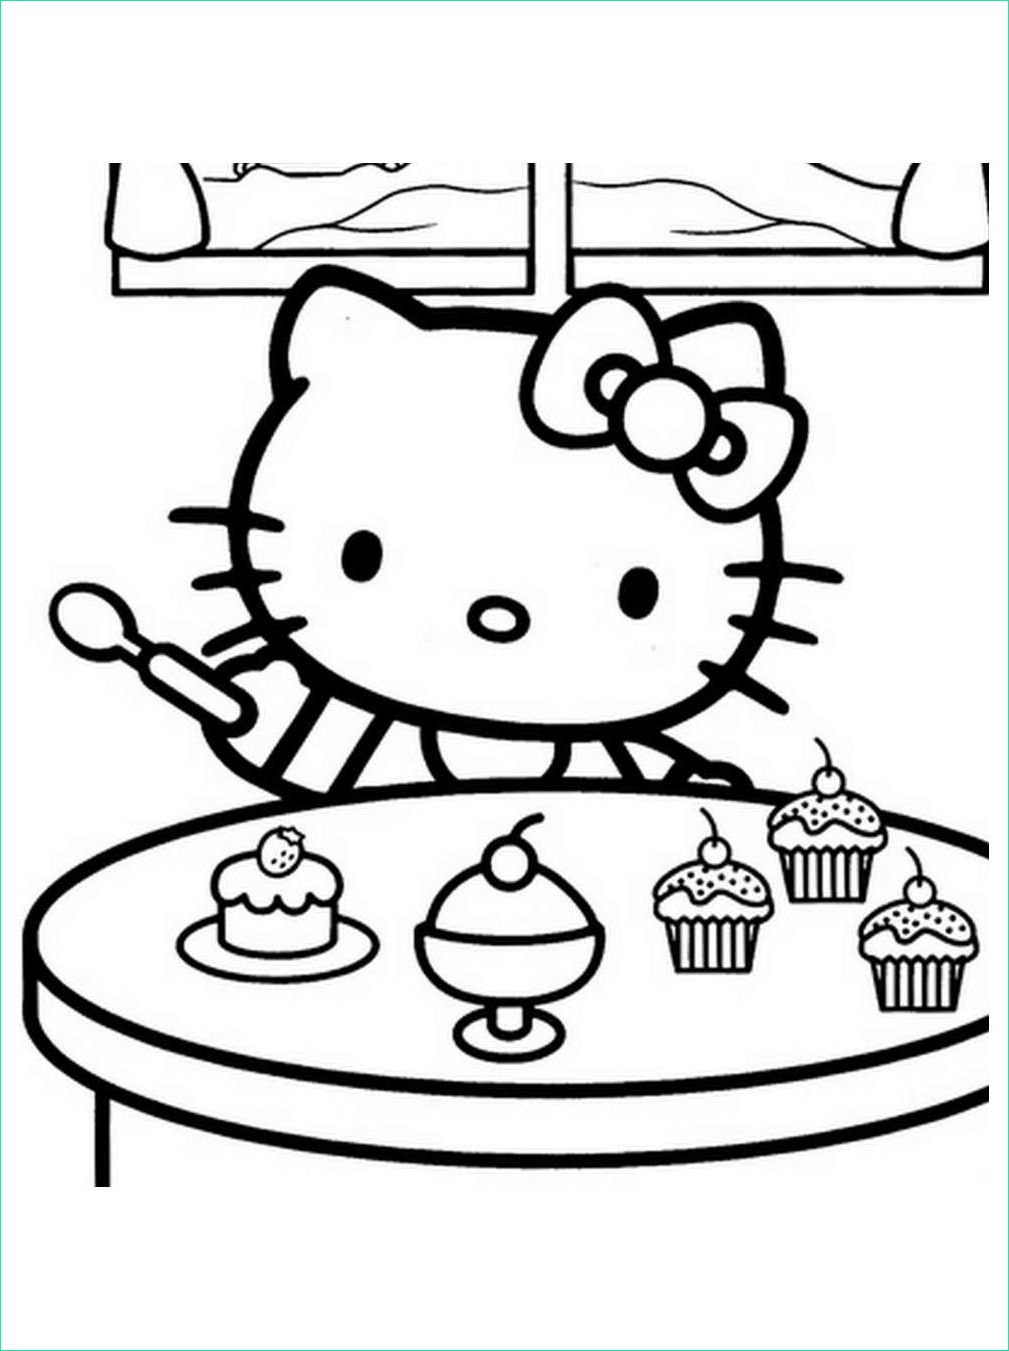 image=hello kitty Coloring for kids hello kitty 1